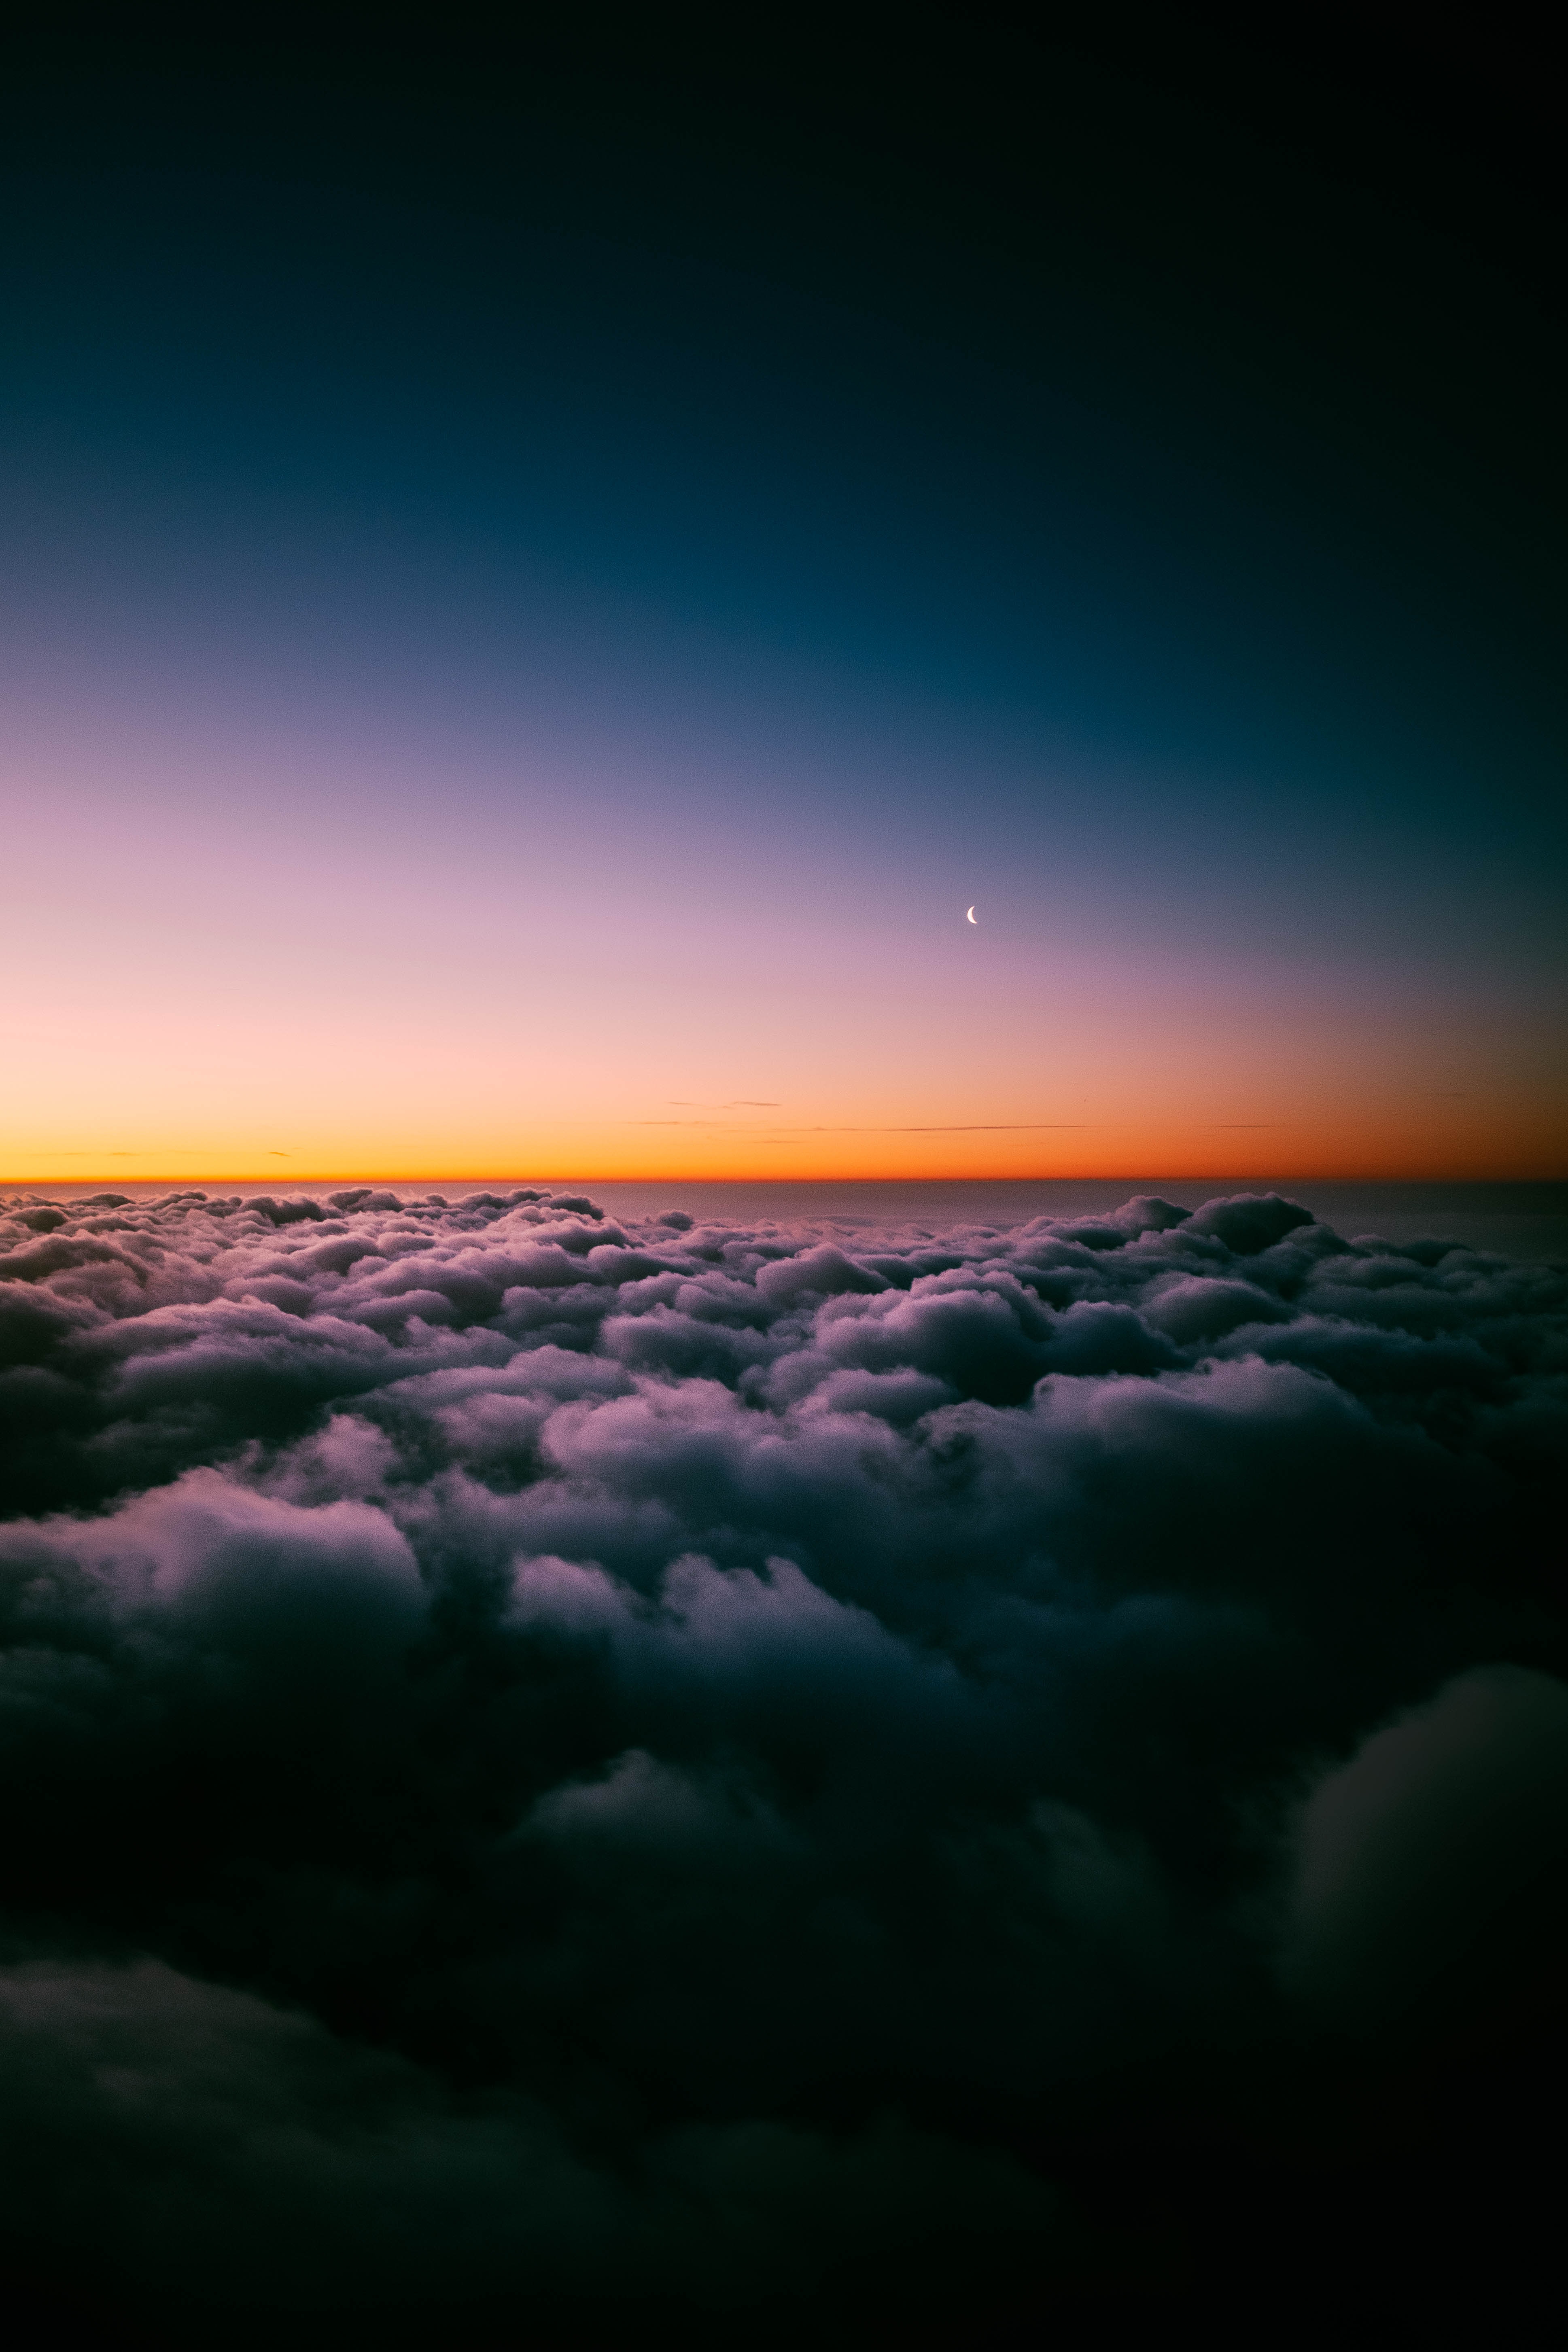 clouds, porous, above the clouds, moon, nature, sunset, twilight, dusk, sky horizon phone background